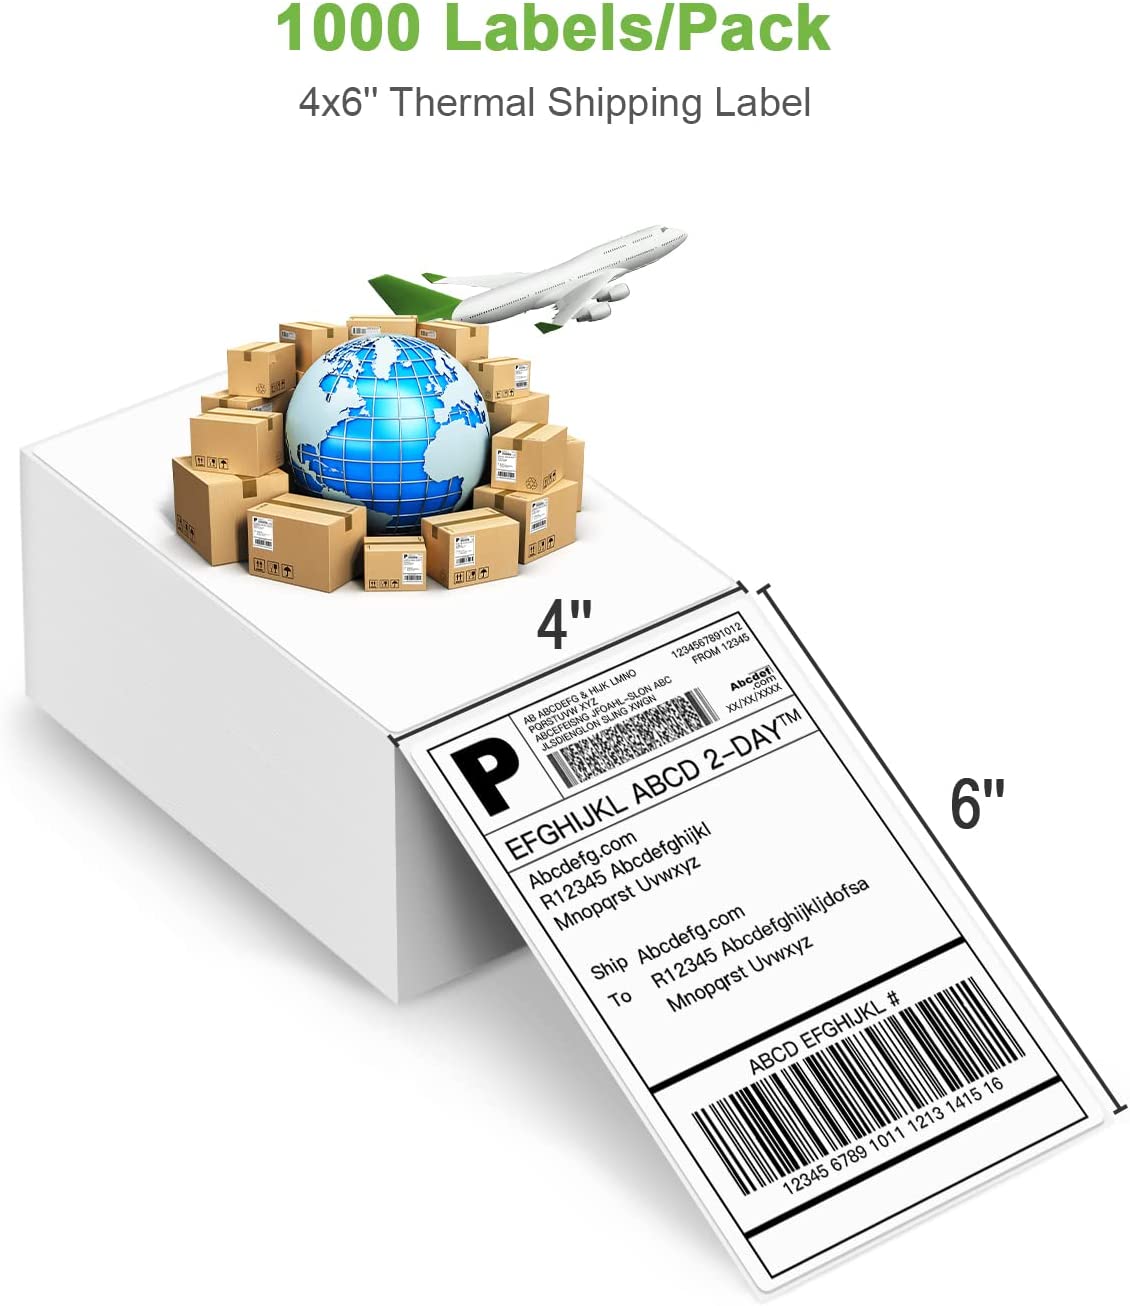 Direct Thermal Label on Zero Waste Liner, 4 x 6